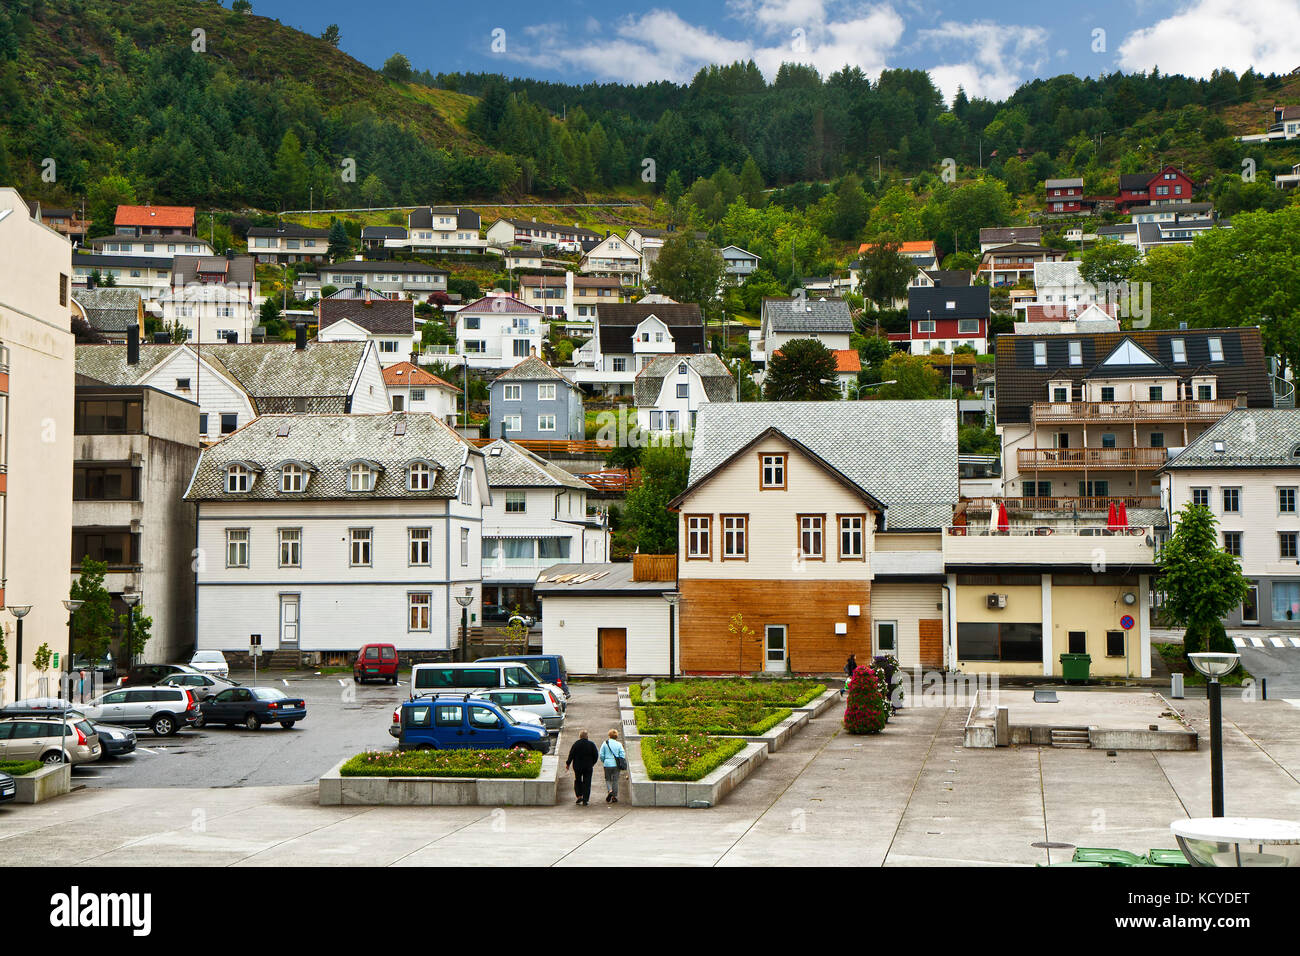 The Norwegian town Maloy located on a slope of mountain Stock Photo